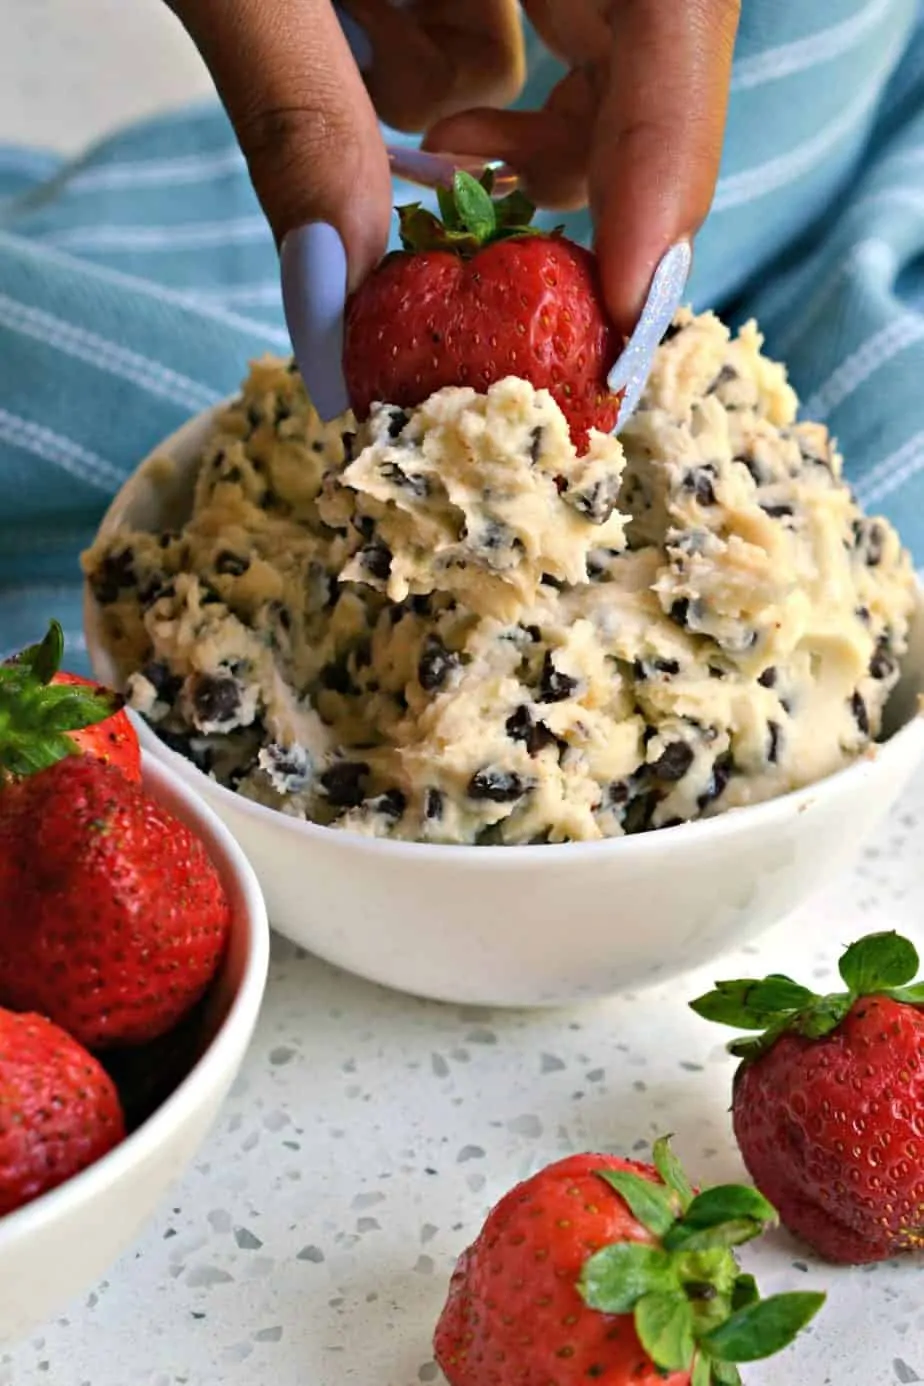 Serve Cookie Dough Dip with pretzels for a sweet and salty combo or with fresh fruit for a colorful display.